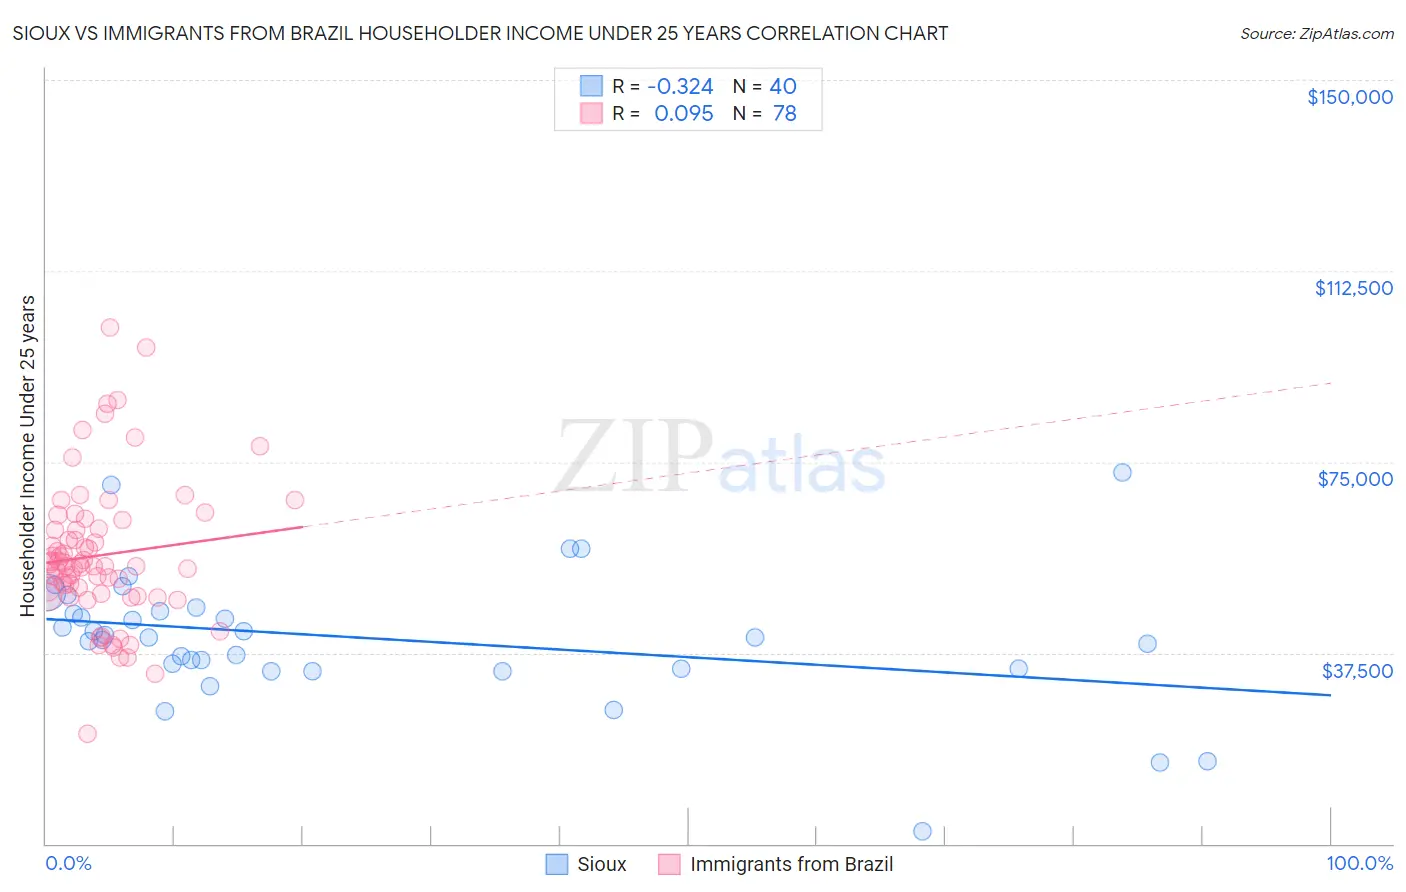 Sioux vs Immigrants from Brazil Householder Income Under 25 years